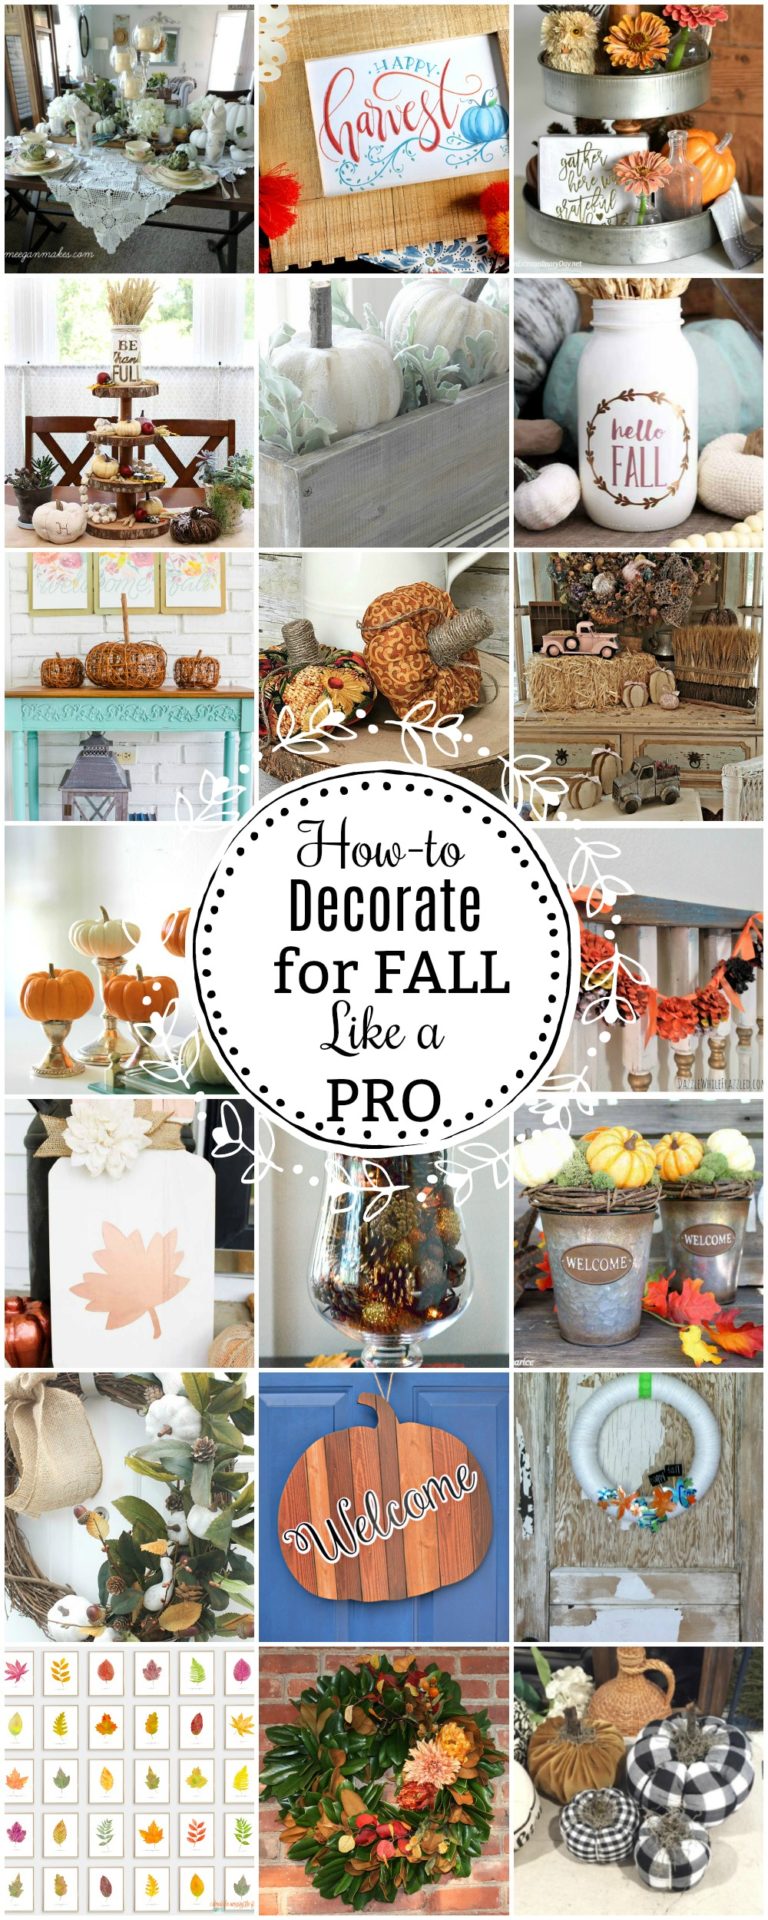 Pro Decorating Tips for Fall